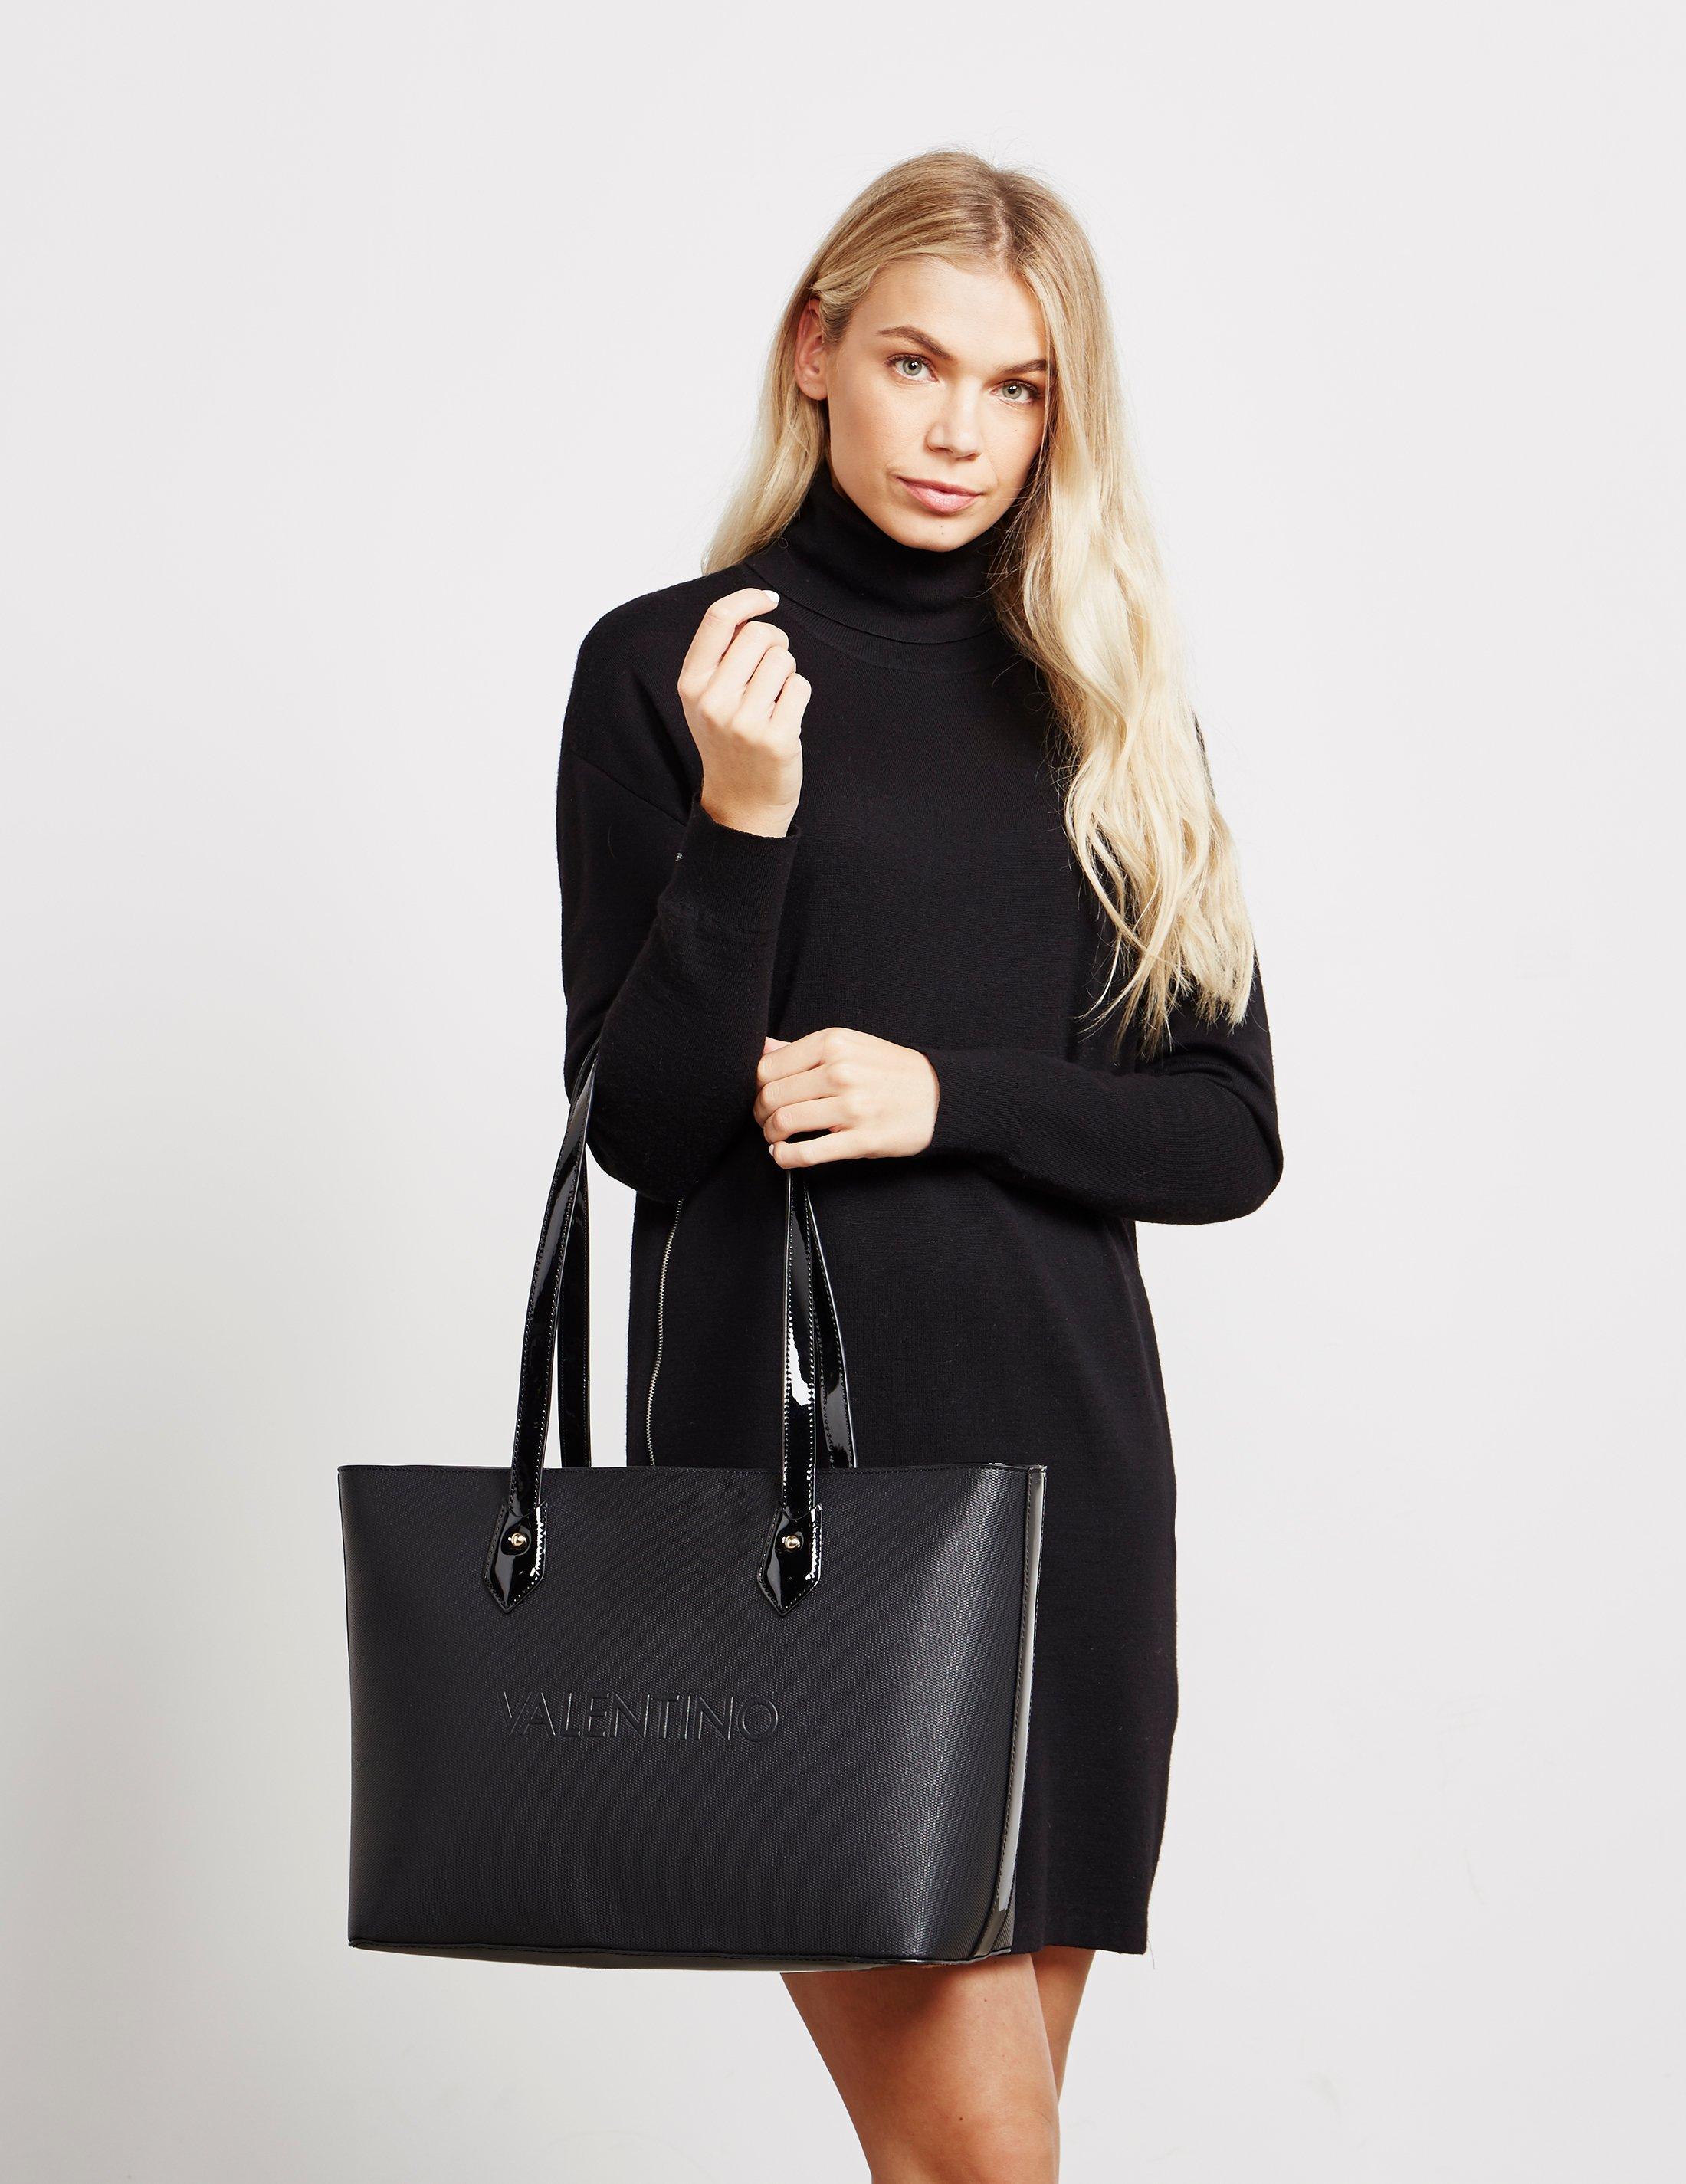 Buy Valentino Bags Black Olive Logo Shopper Tote Bag from the Next UK  online shop